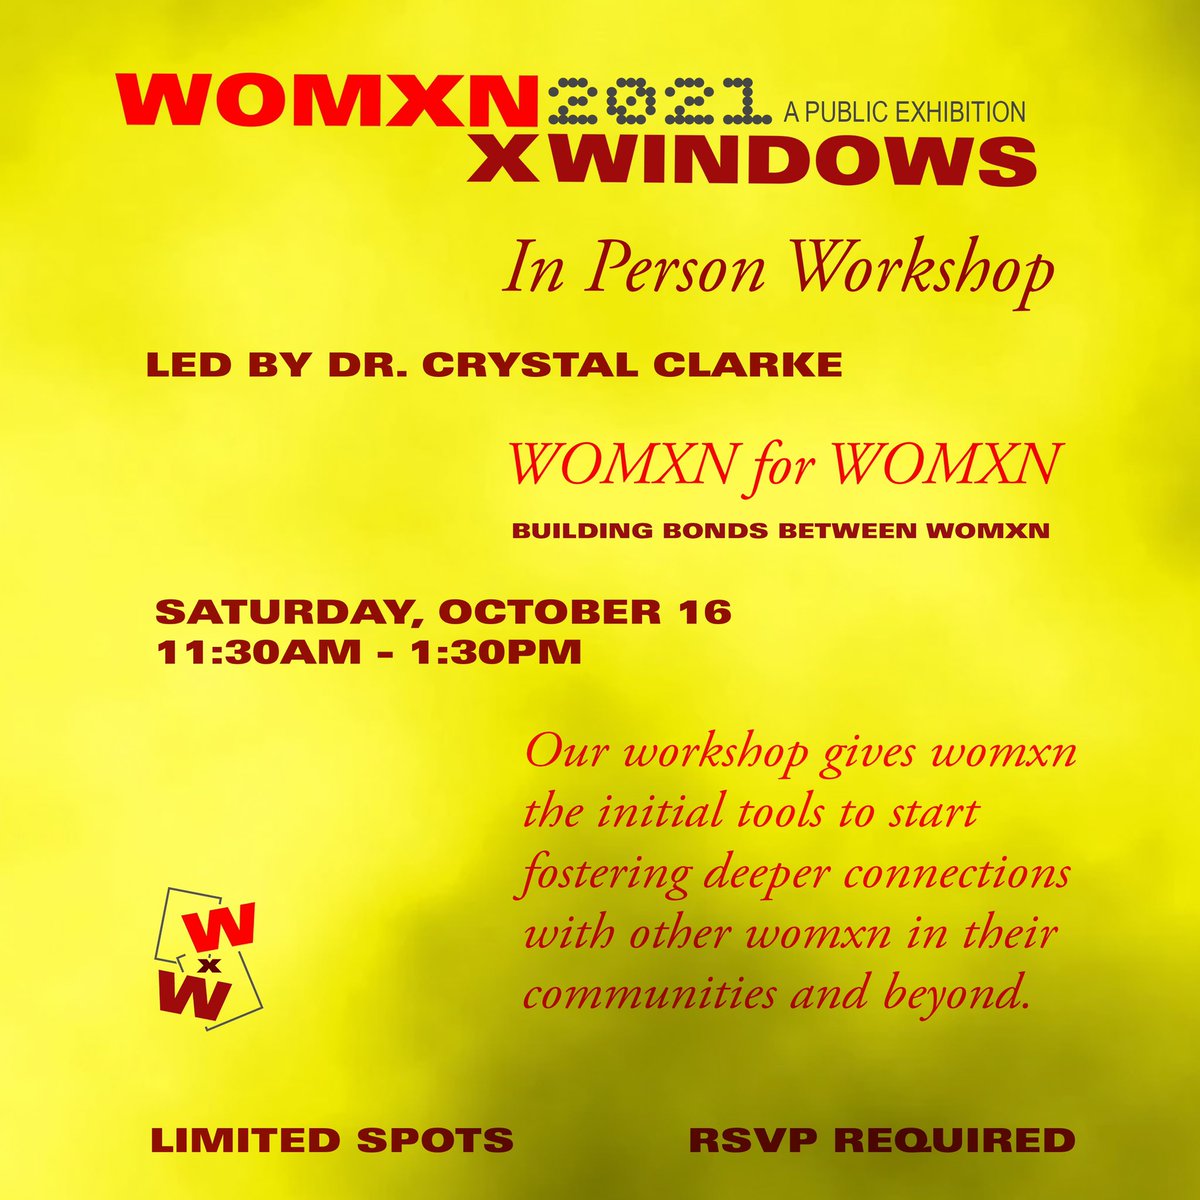 Discover tools to start fostering connection with #womxn in your communities and beyond - join us for a FREE in-person #workshop with social psychologist Dr. Crystal Clarke this Saturday, Oct 16 at 11:30am at Murmurs in #DTLA >>> Sign up here: docs.google.com/forms/d/e/1FAI…